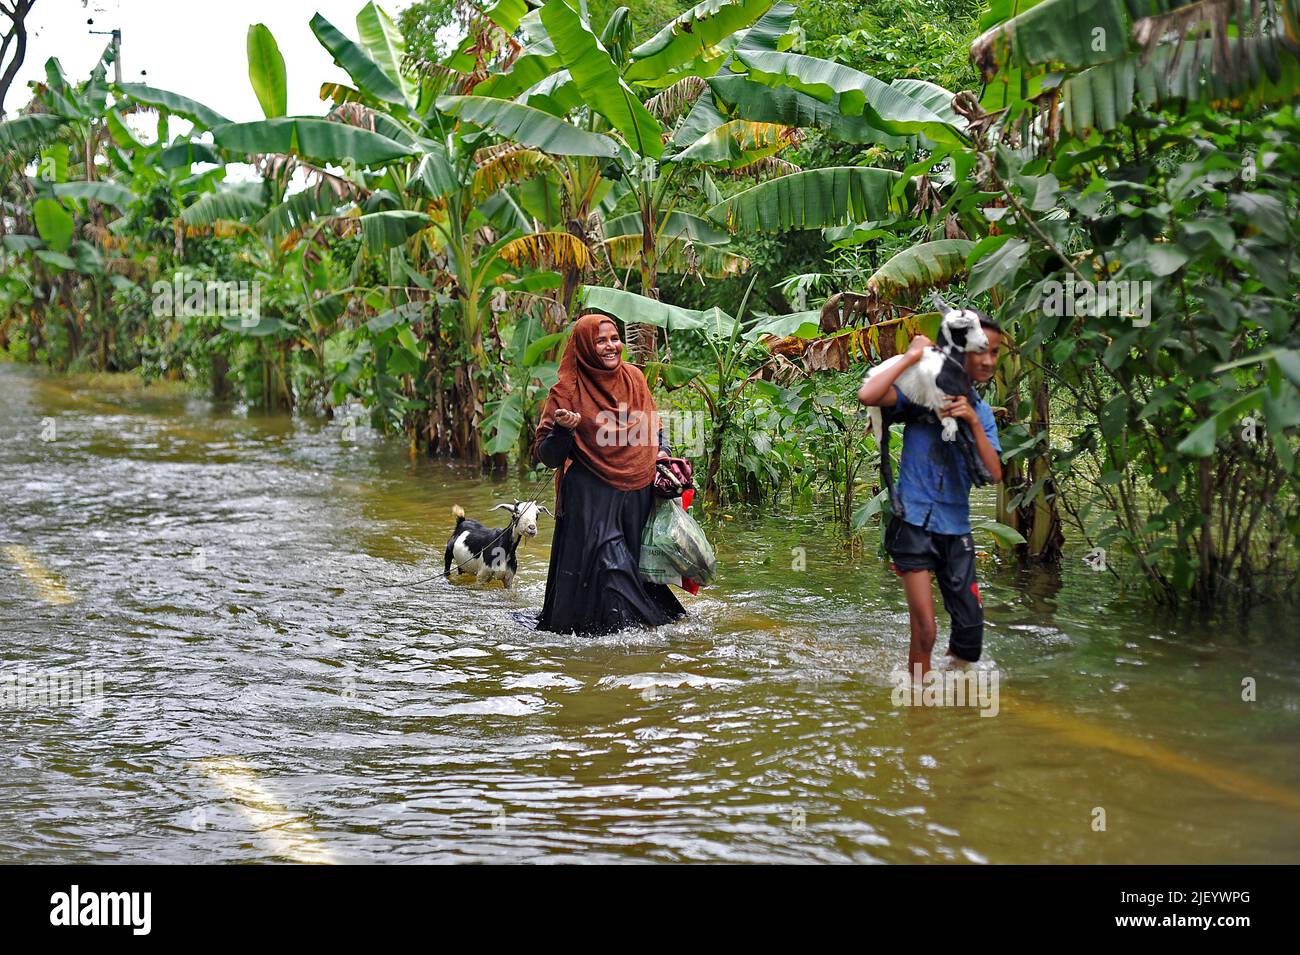 Sylhet, Mexico City, Bangladesh: June 26, 2022, 26 June 2022. Sylhet, Bangladesh: People going along with their livestok in the Flooded street in the Daudpur Union of Dakkin Surma Upazila of Sylhet. The flood situation in some parts of Sylhet has worsened, with water levels in the Kushiara River rising siince last week. According to the local office of the Bangladesh Water Development Board, the Kushiara was flowing above the danger level at various points. (Credit Image: © Md Rafayat Haque Khan/eyepix via ZUMA Press Wire) Stock Photo